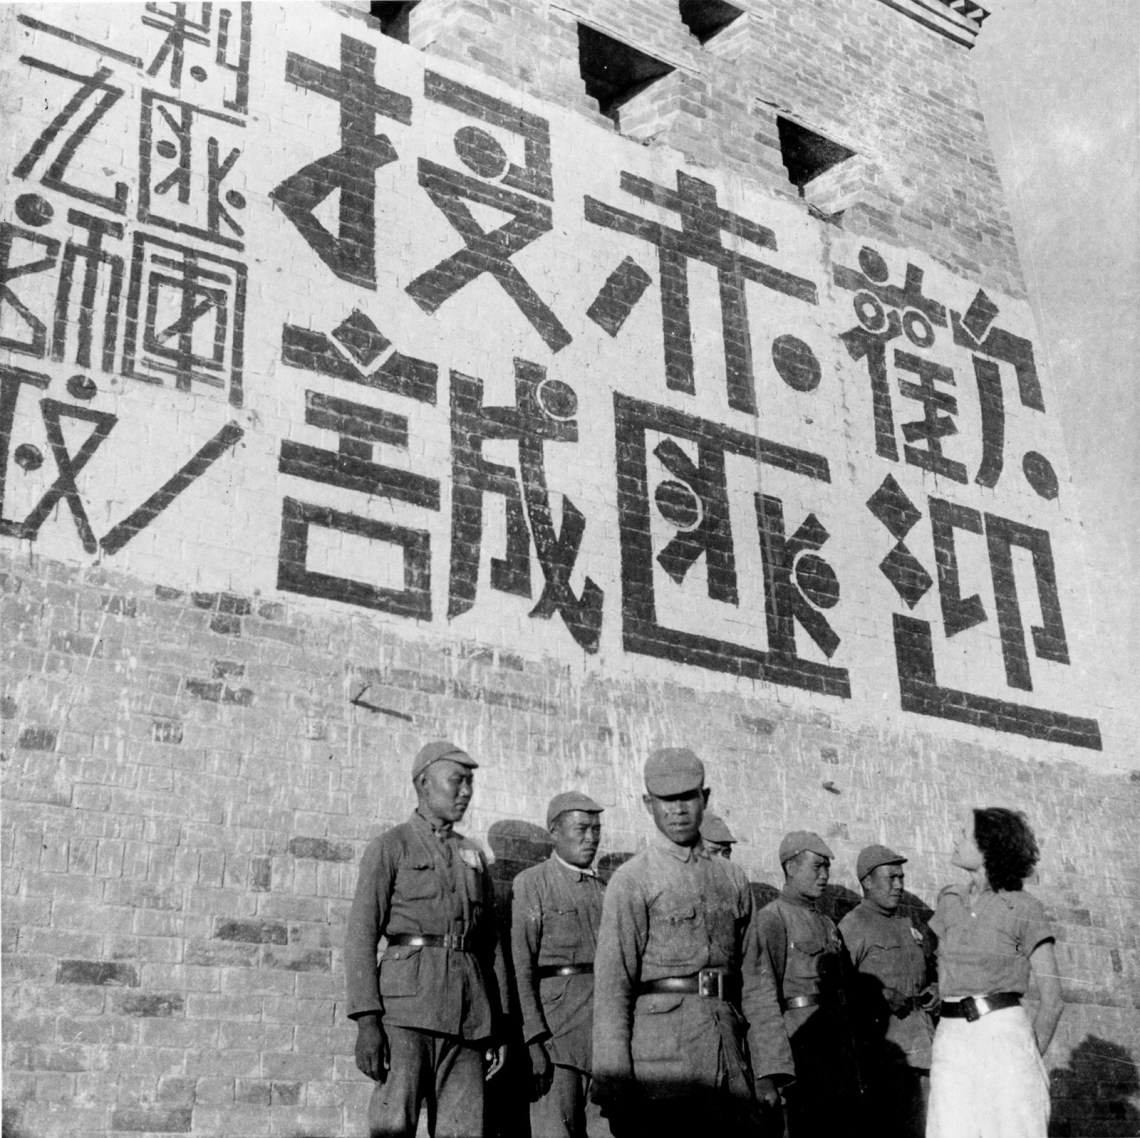 Helen Foster Snow with a group of Manchurian soldiers who had joined Mao’s Red Army, Shaanxi province, China